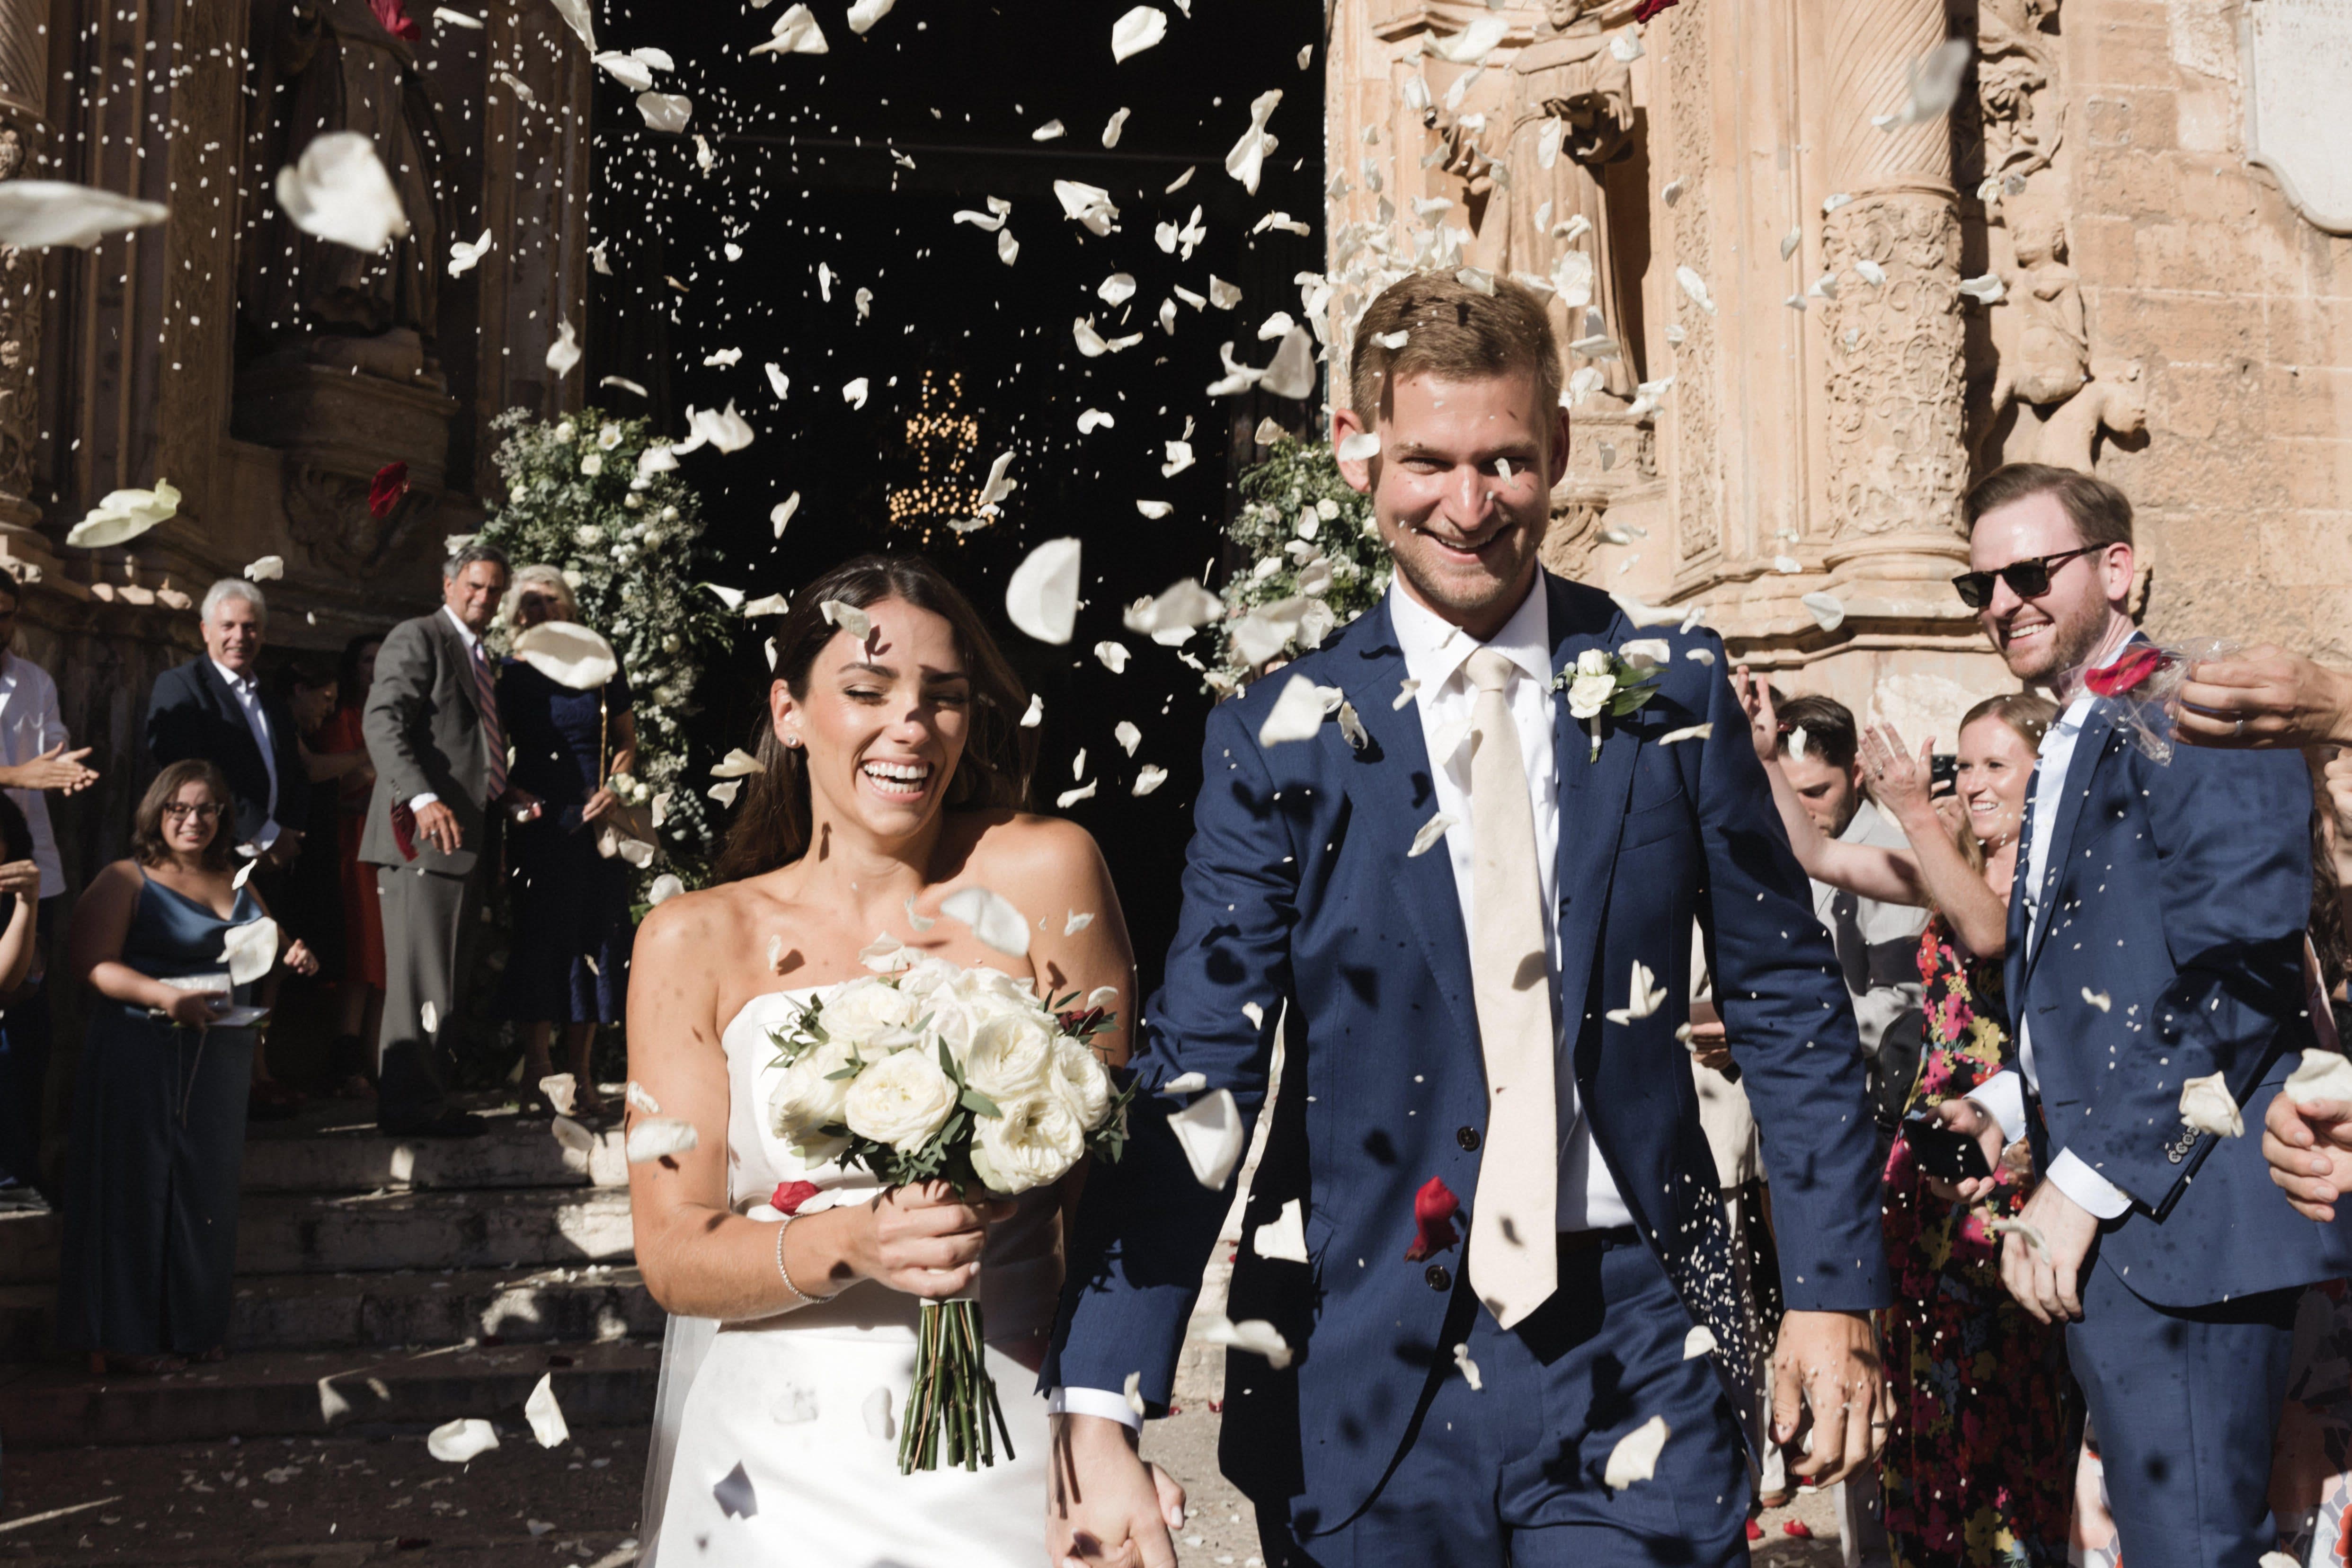 Cristina Meneses '15 and Ryan Aceto '14 celebrated their wedding in Mallorca Spain